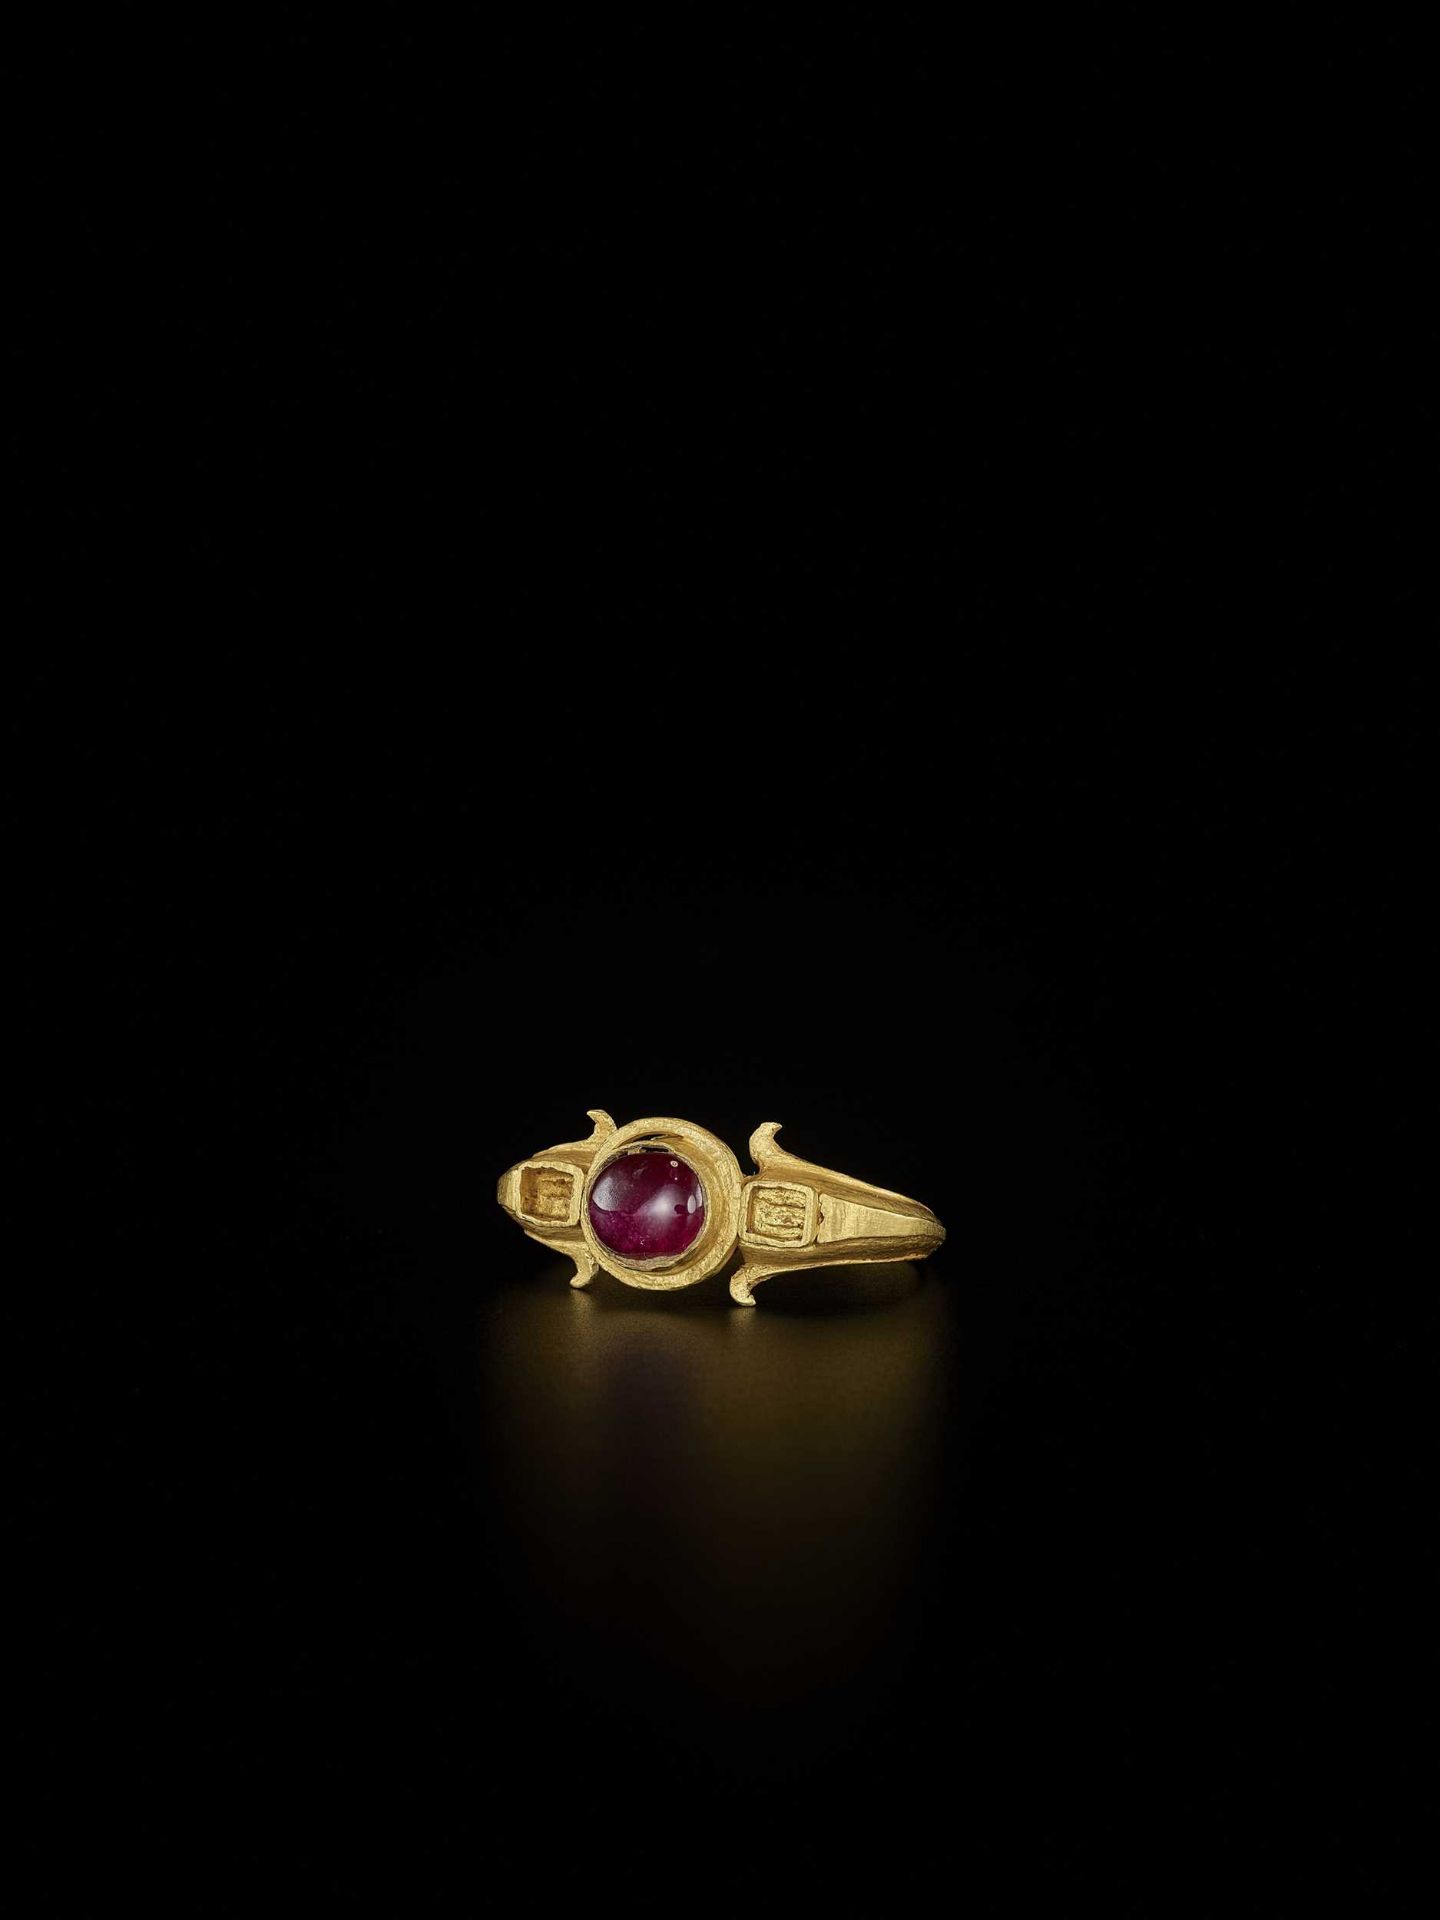 AN IMPRESSIVE BURMESE GOLD RING WITH A LARGE ‘SANG DE PIGEON’ RUBY